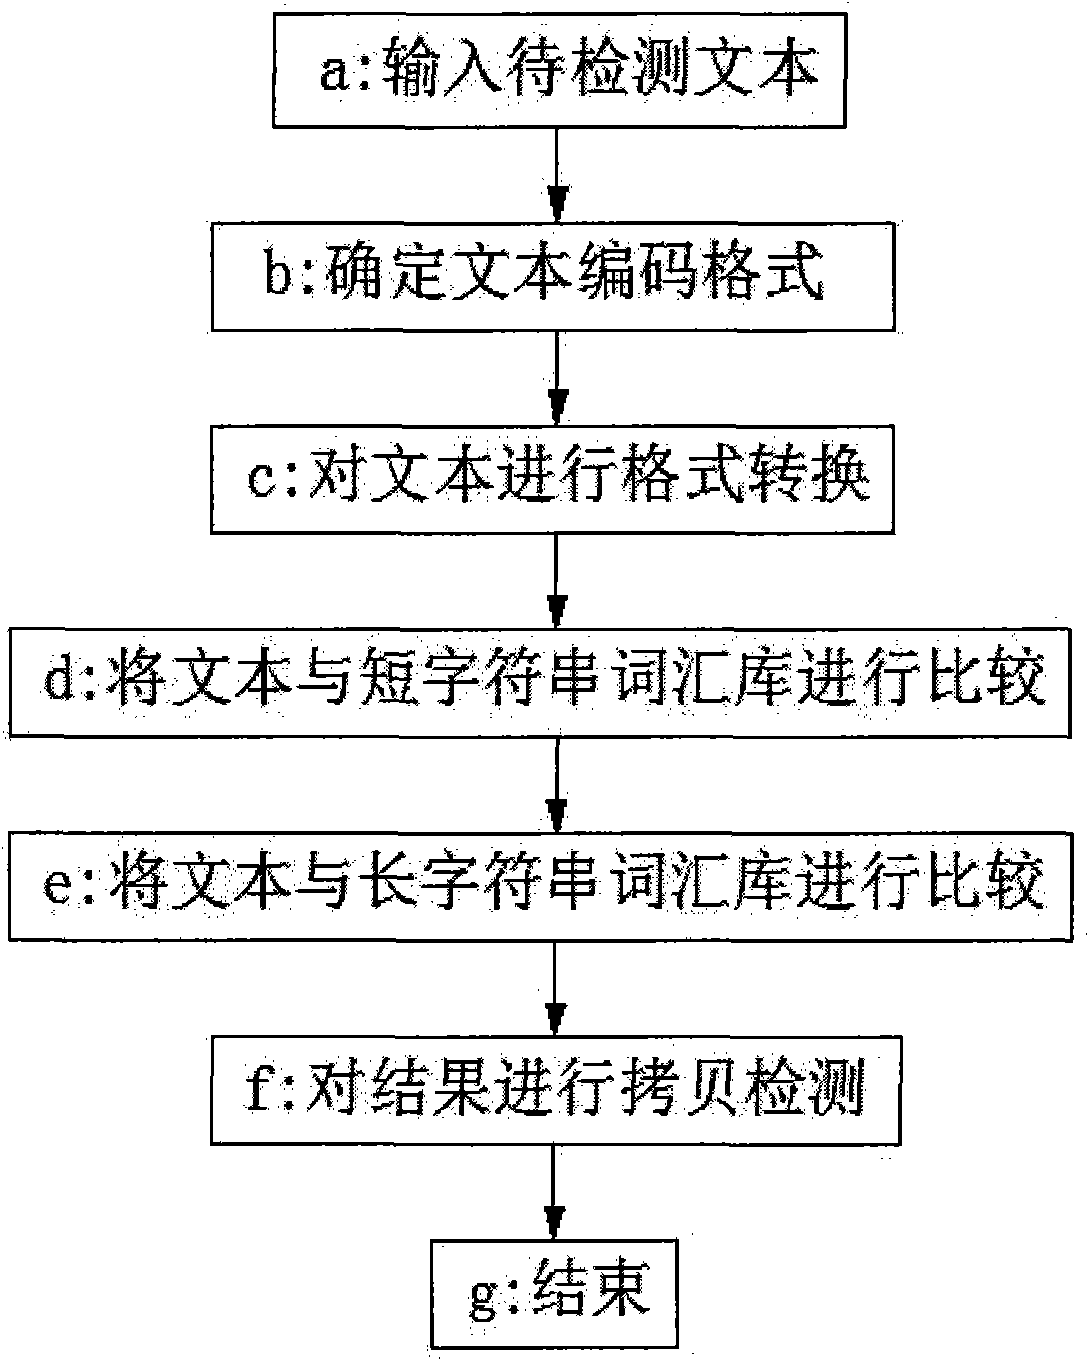 Method for carrying out harmful content recognition on network text and short message service